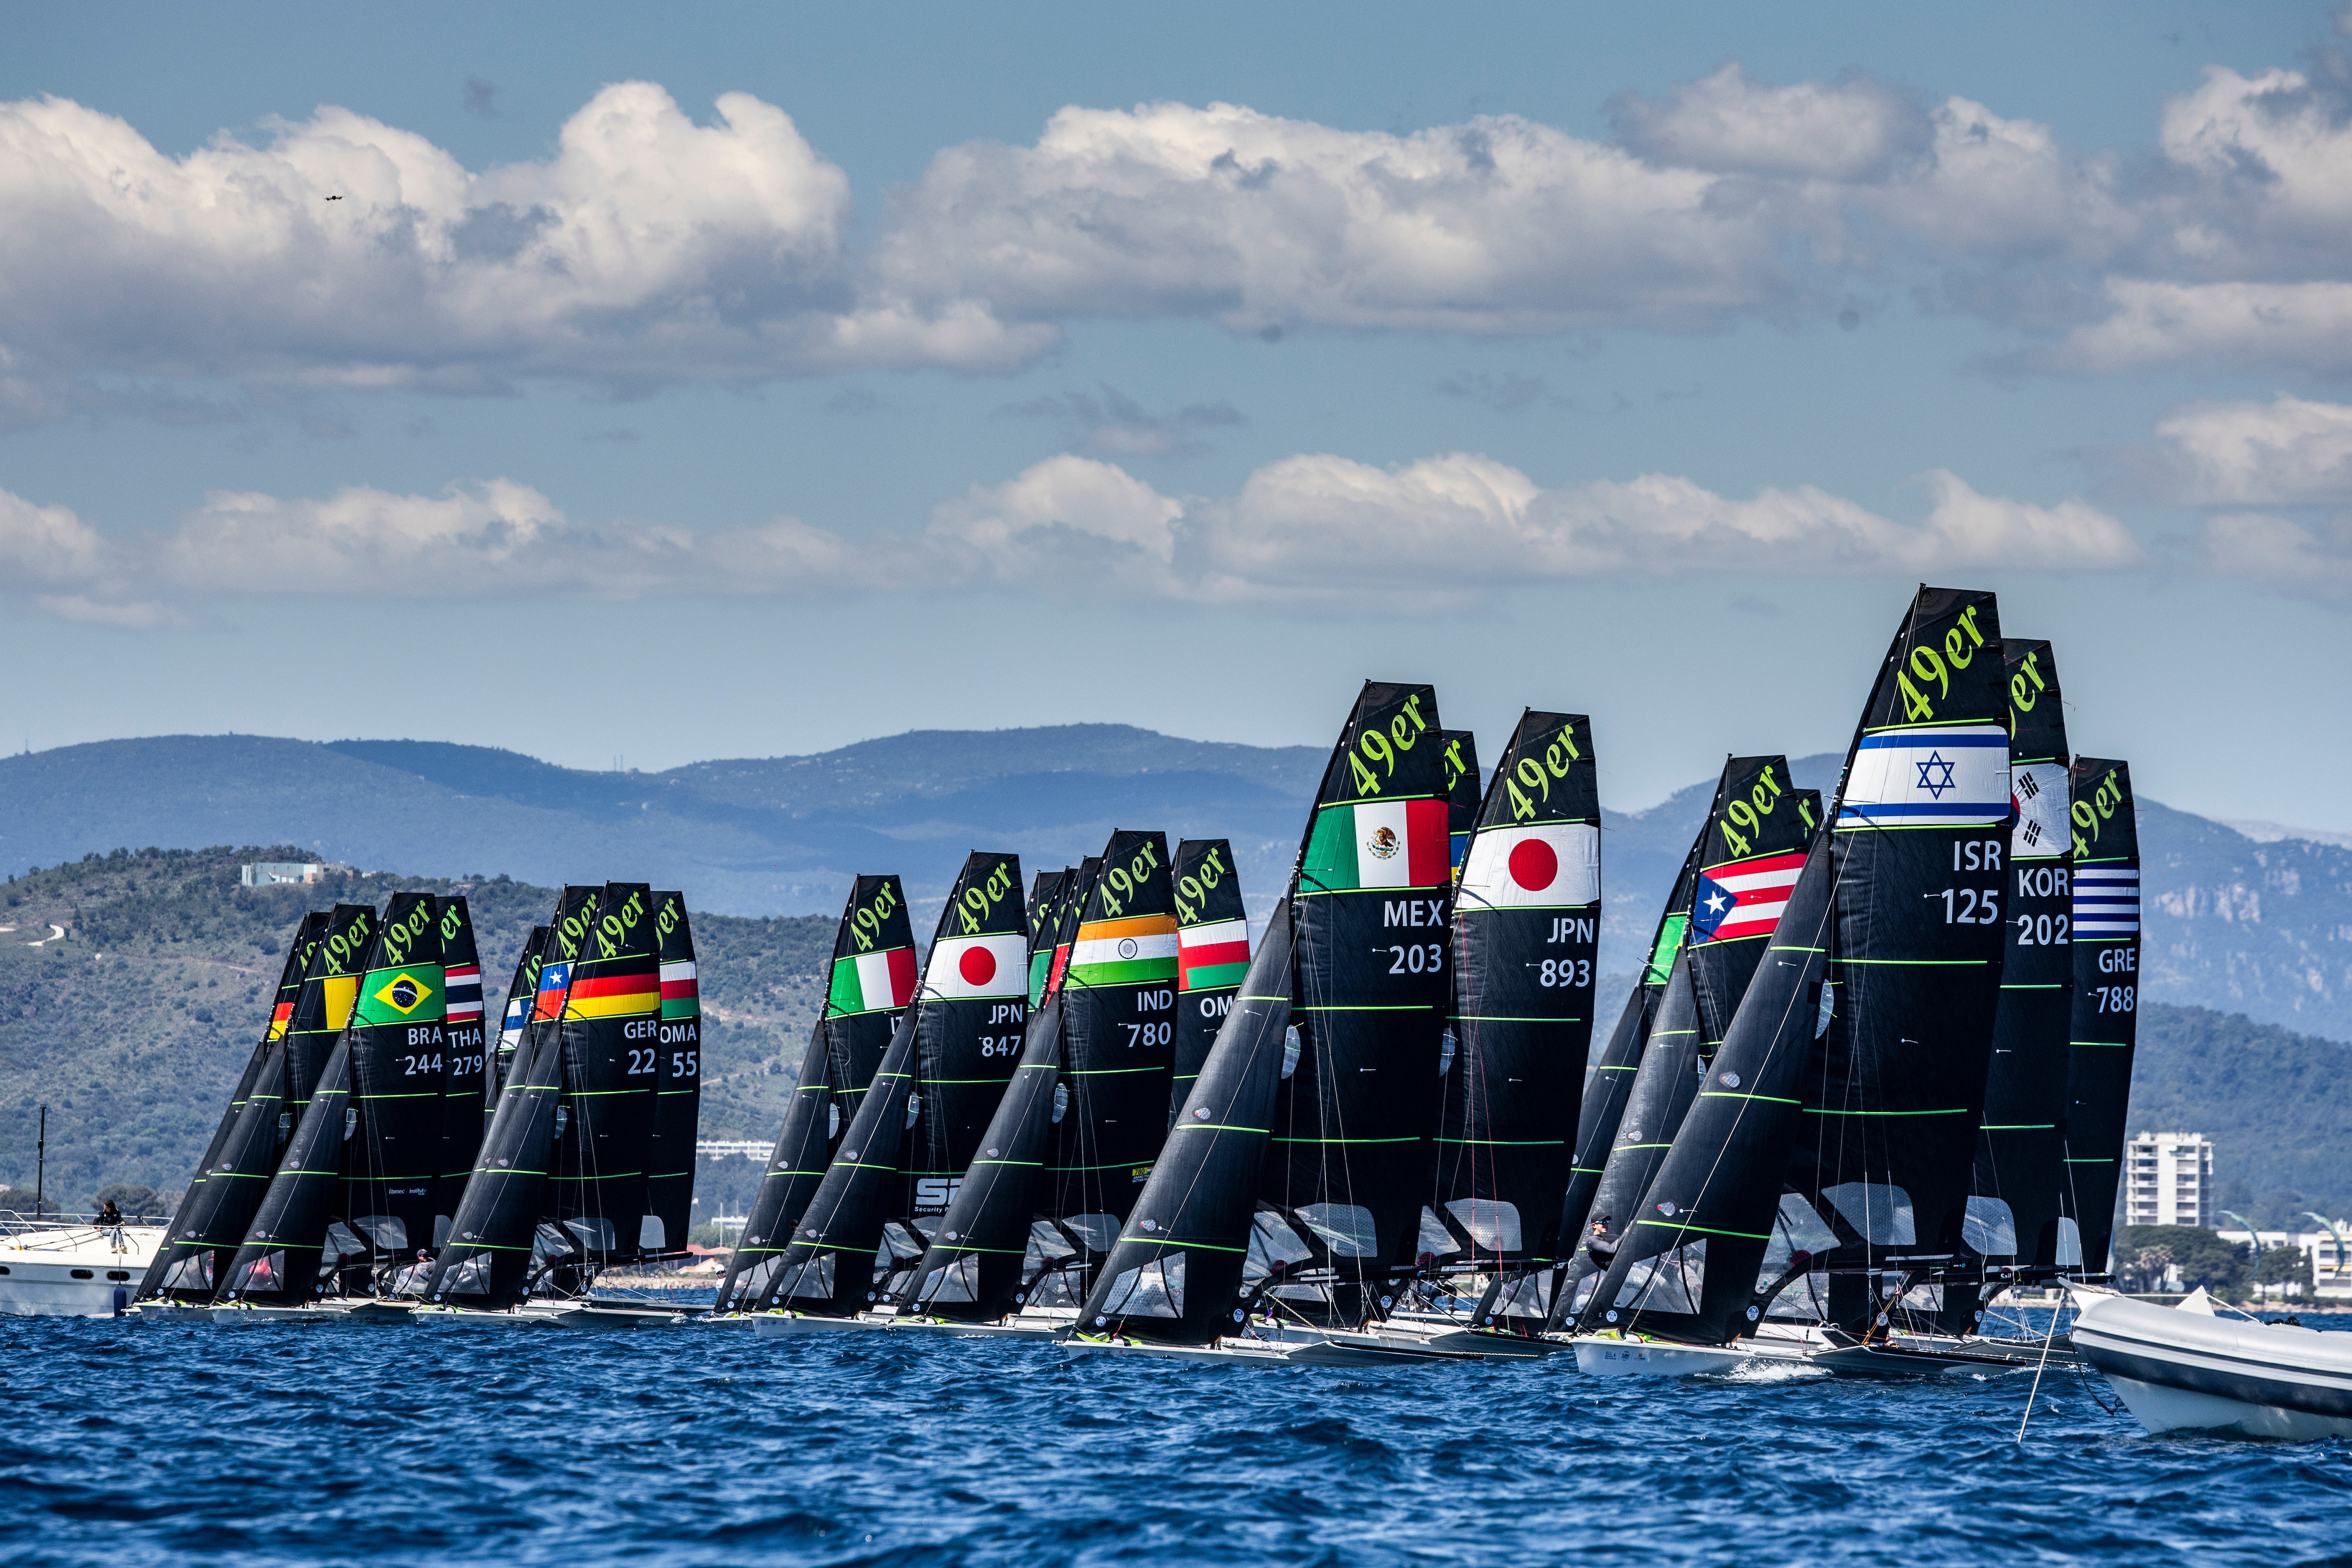  Olympic Classes - Last Chance Regatta - Hyères FRA - Day 1 - Elena Lengwiler SUI in the lead